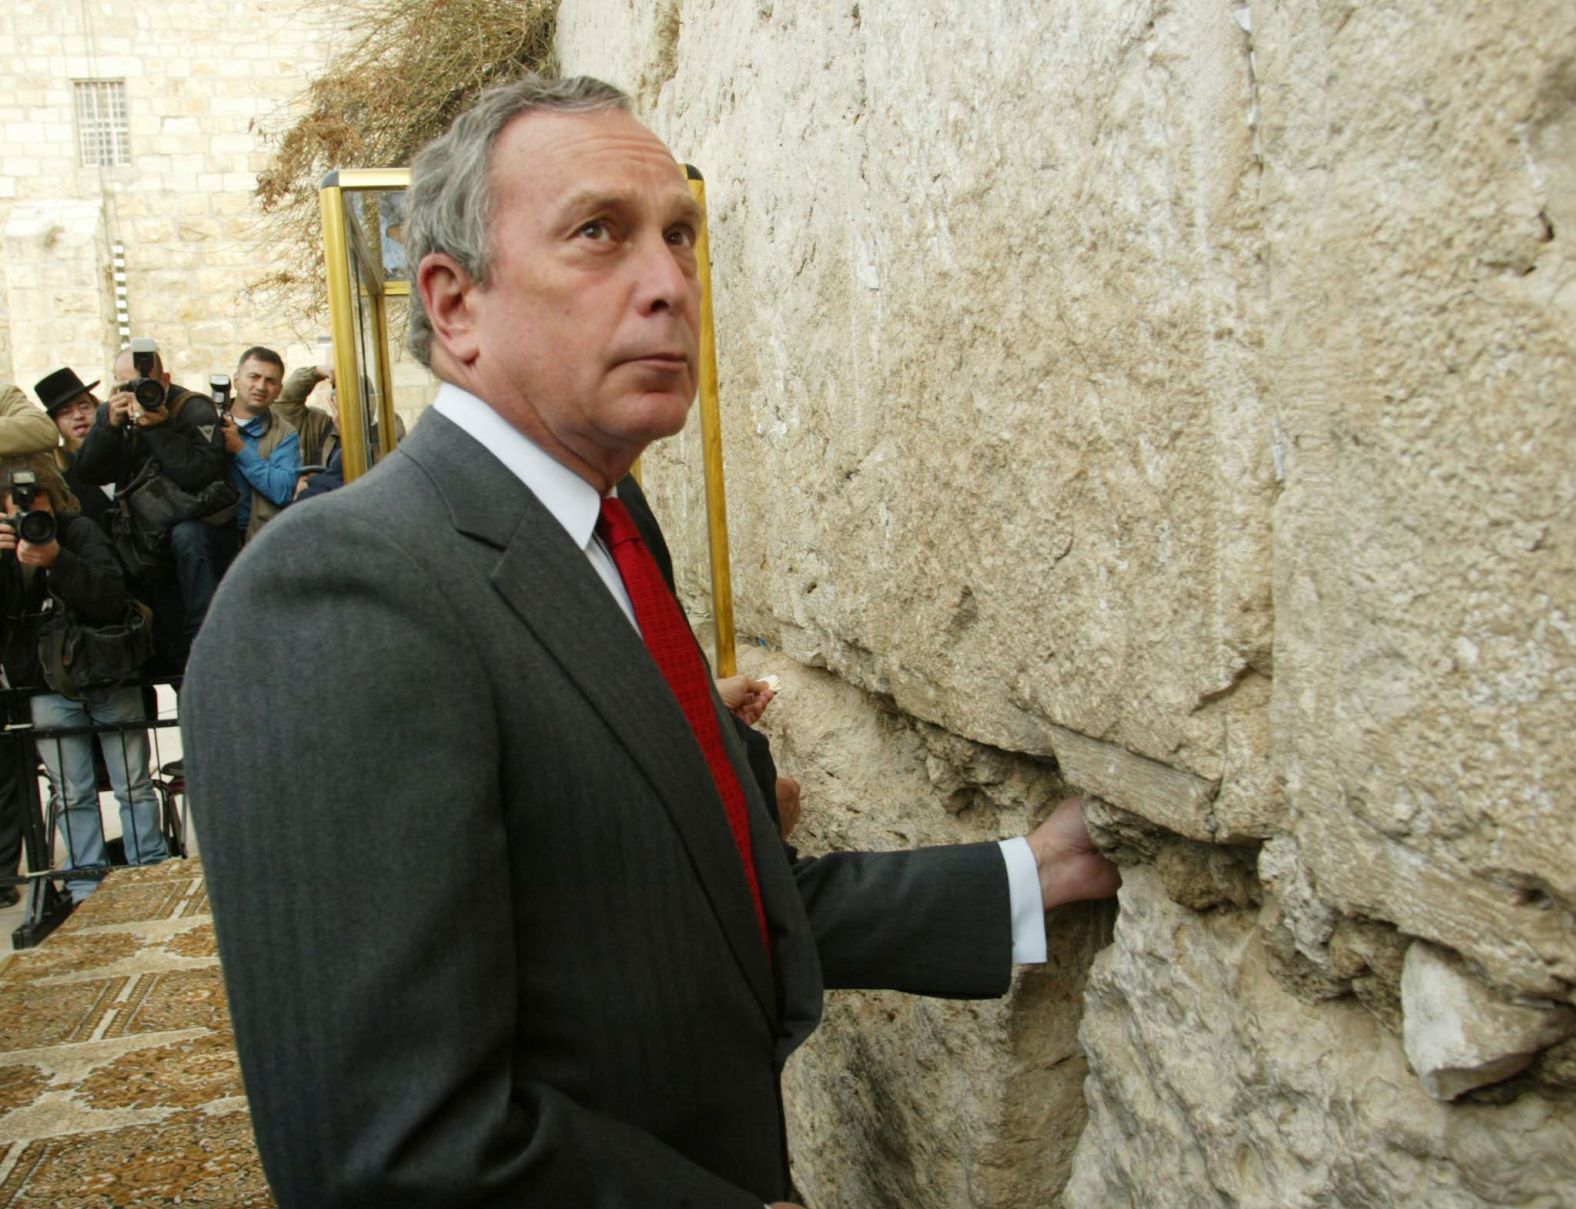 Bloomberg, as mayor-elect, visits the Western Wall in Jerusalem in December 2001.